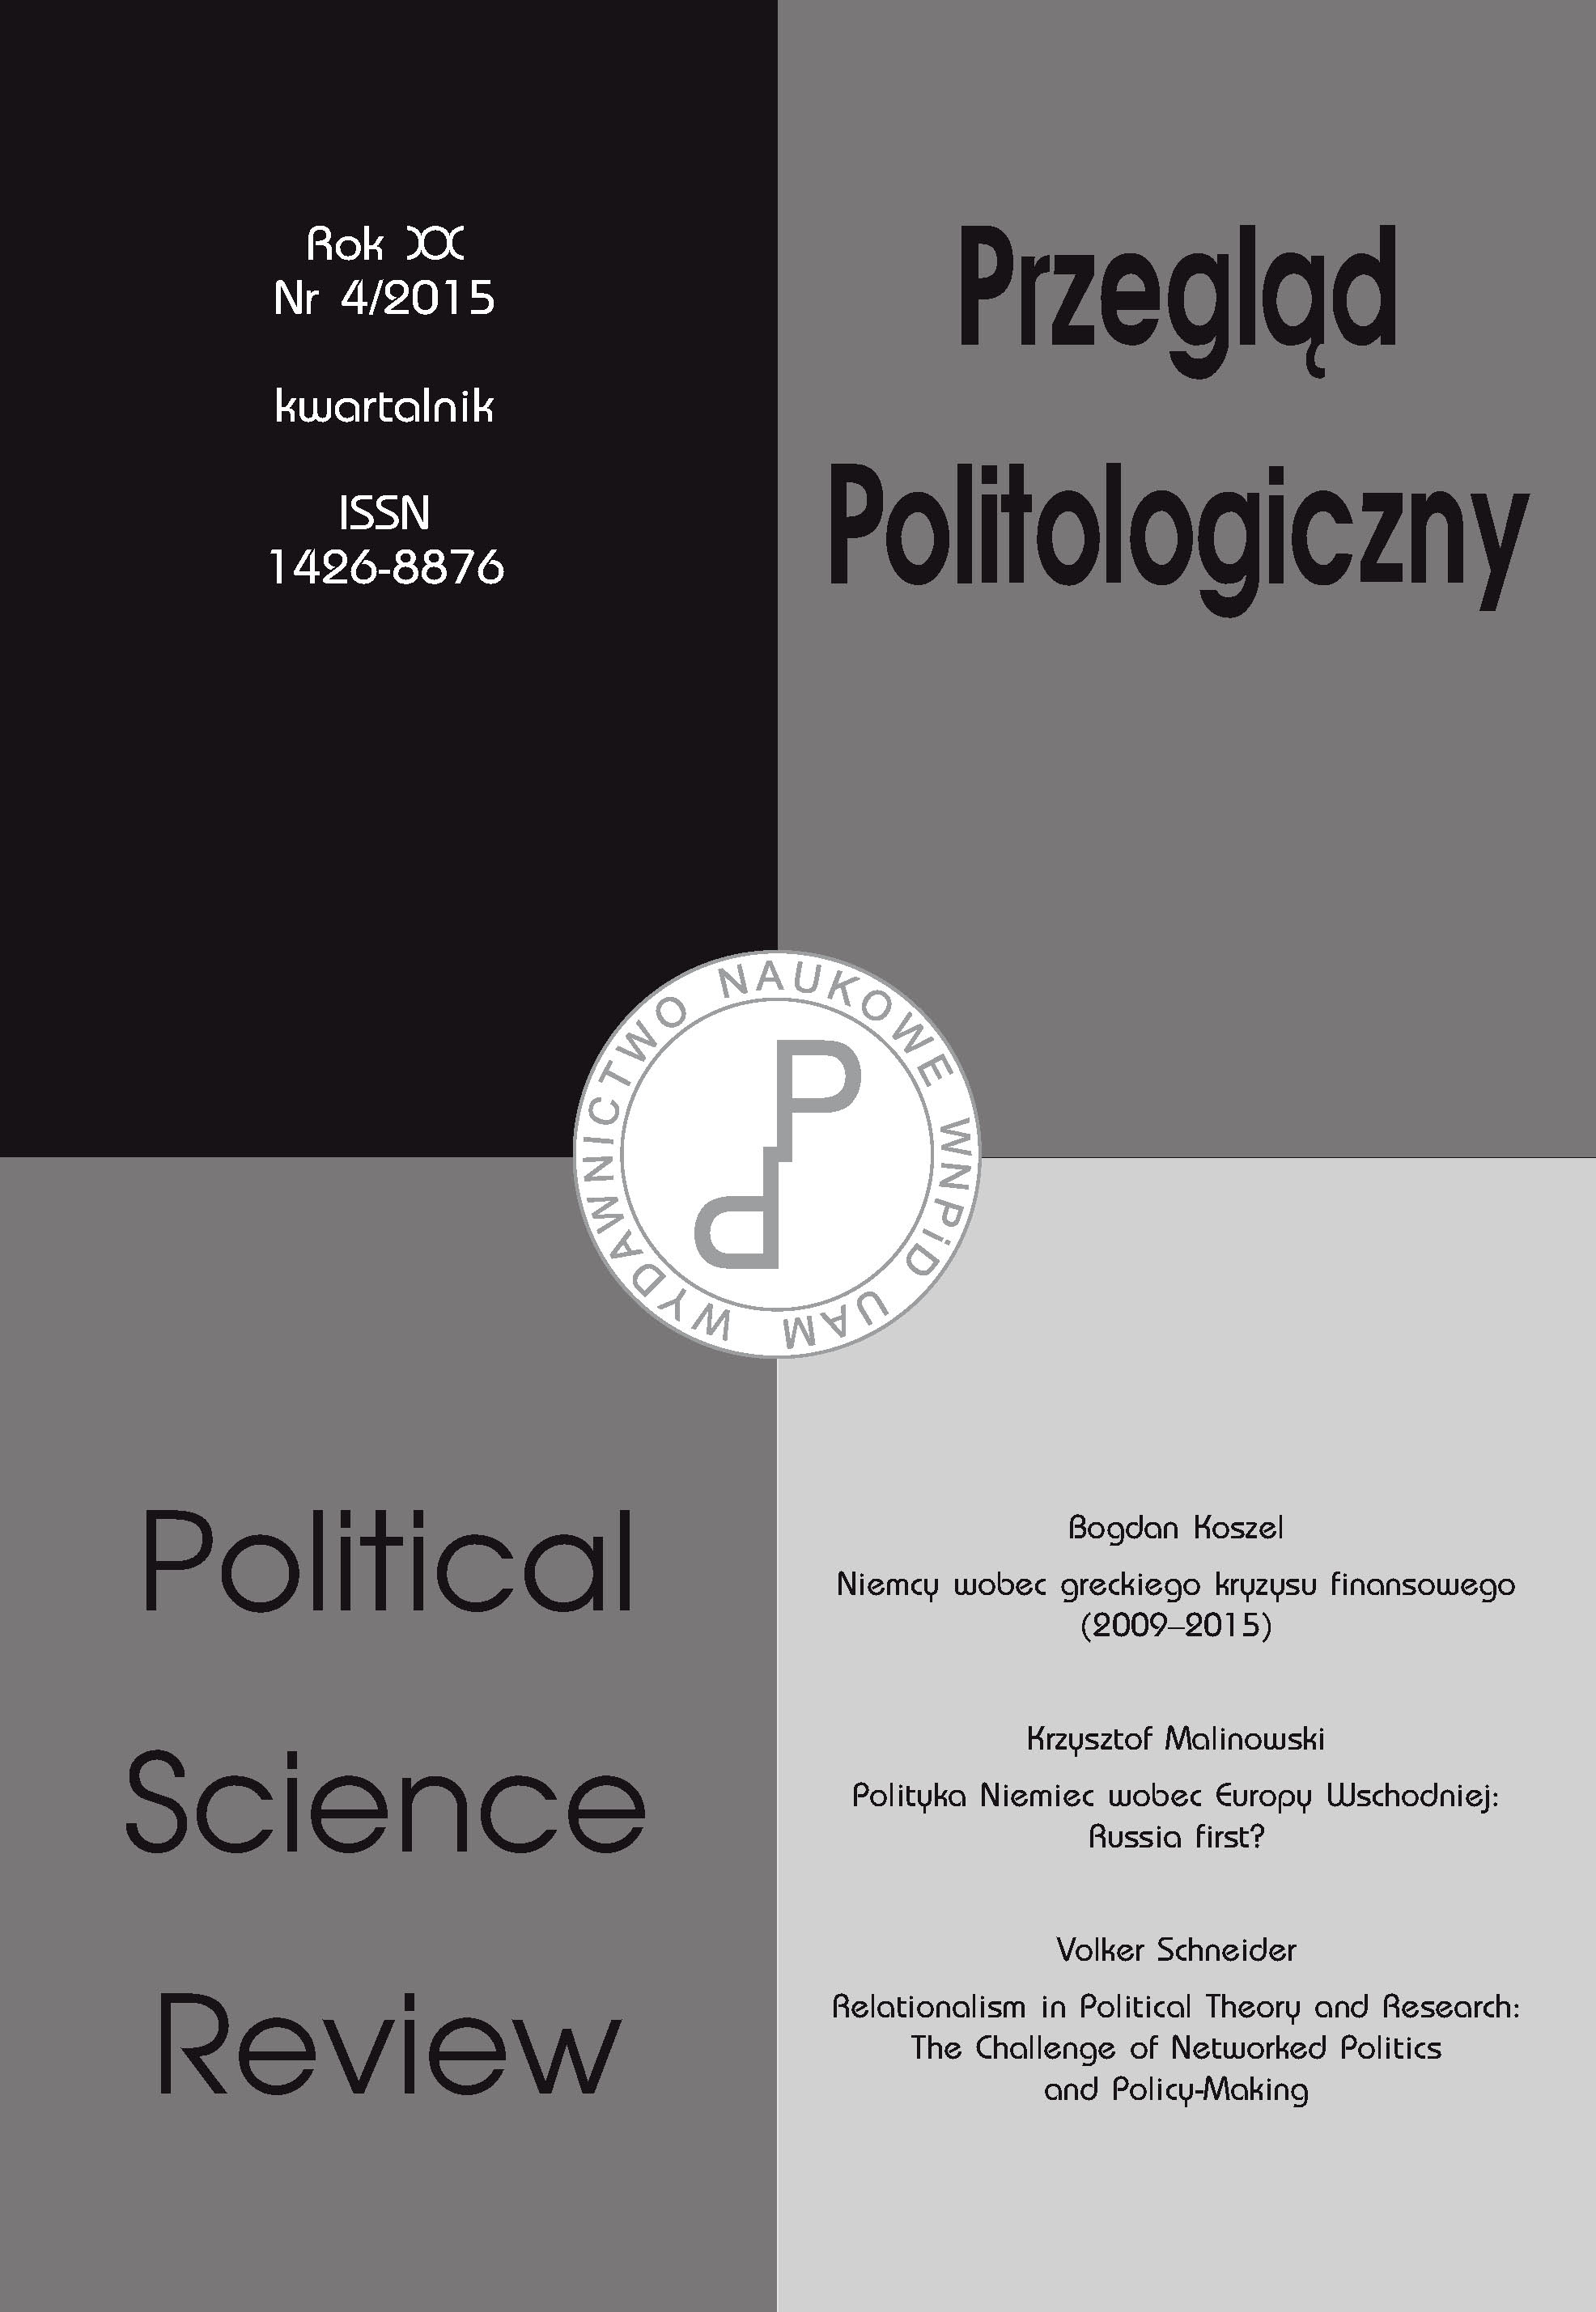 Relationalism in Political Theory and Research: The Challenge of Networked Politics and Policy-Making